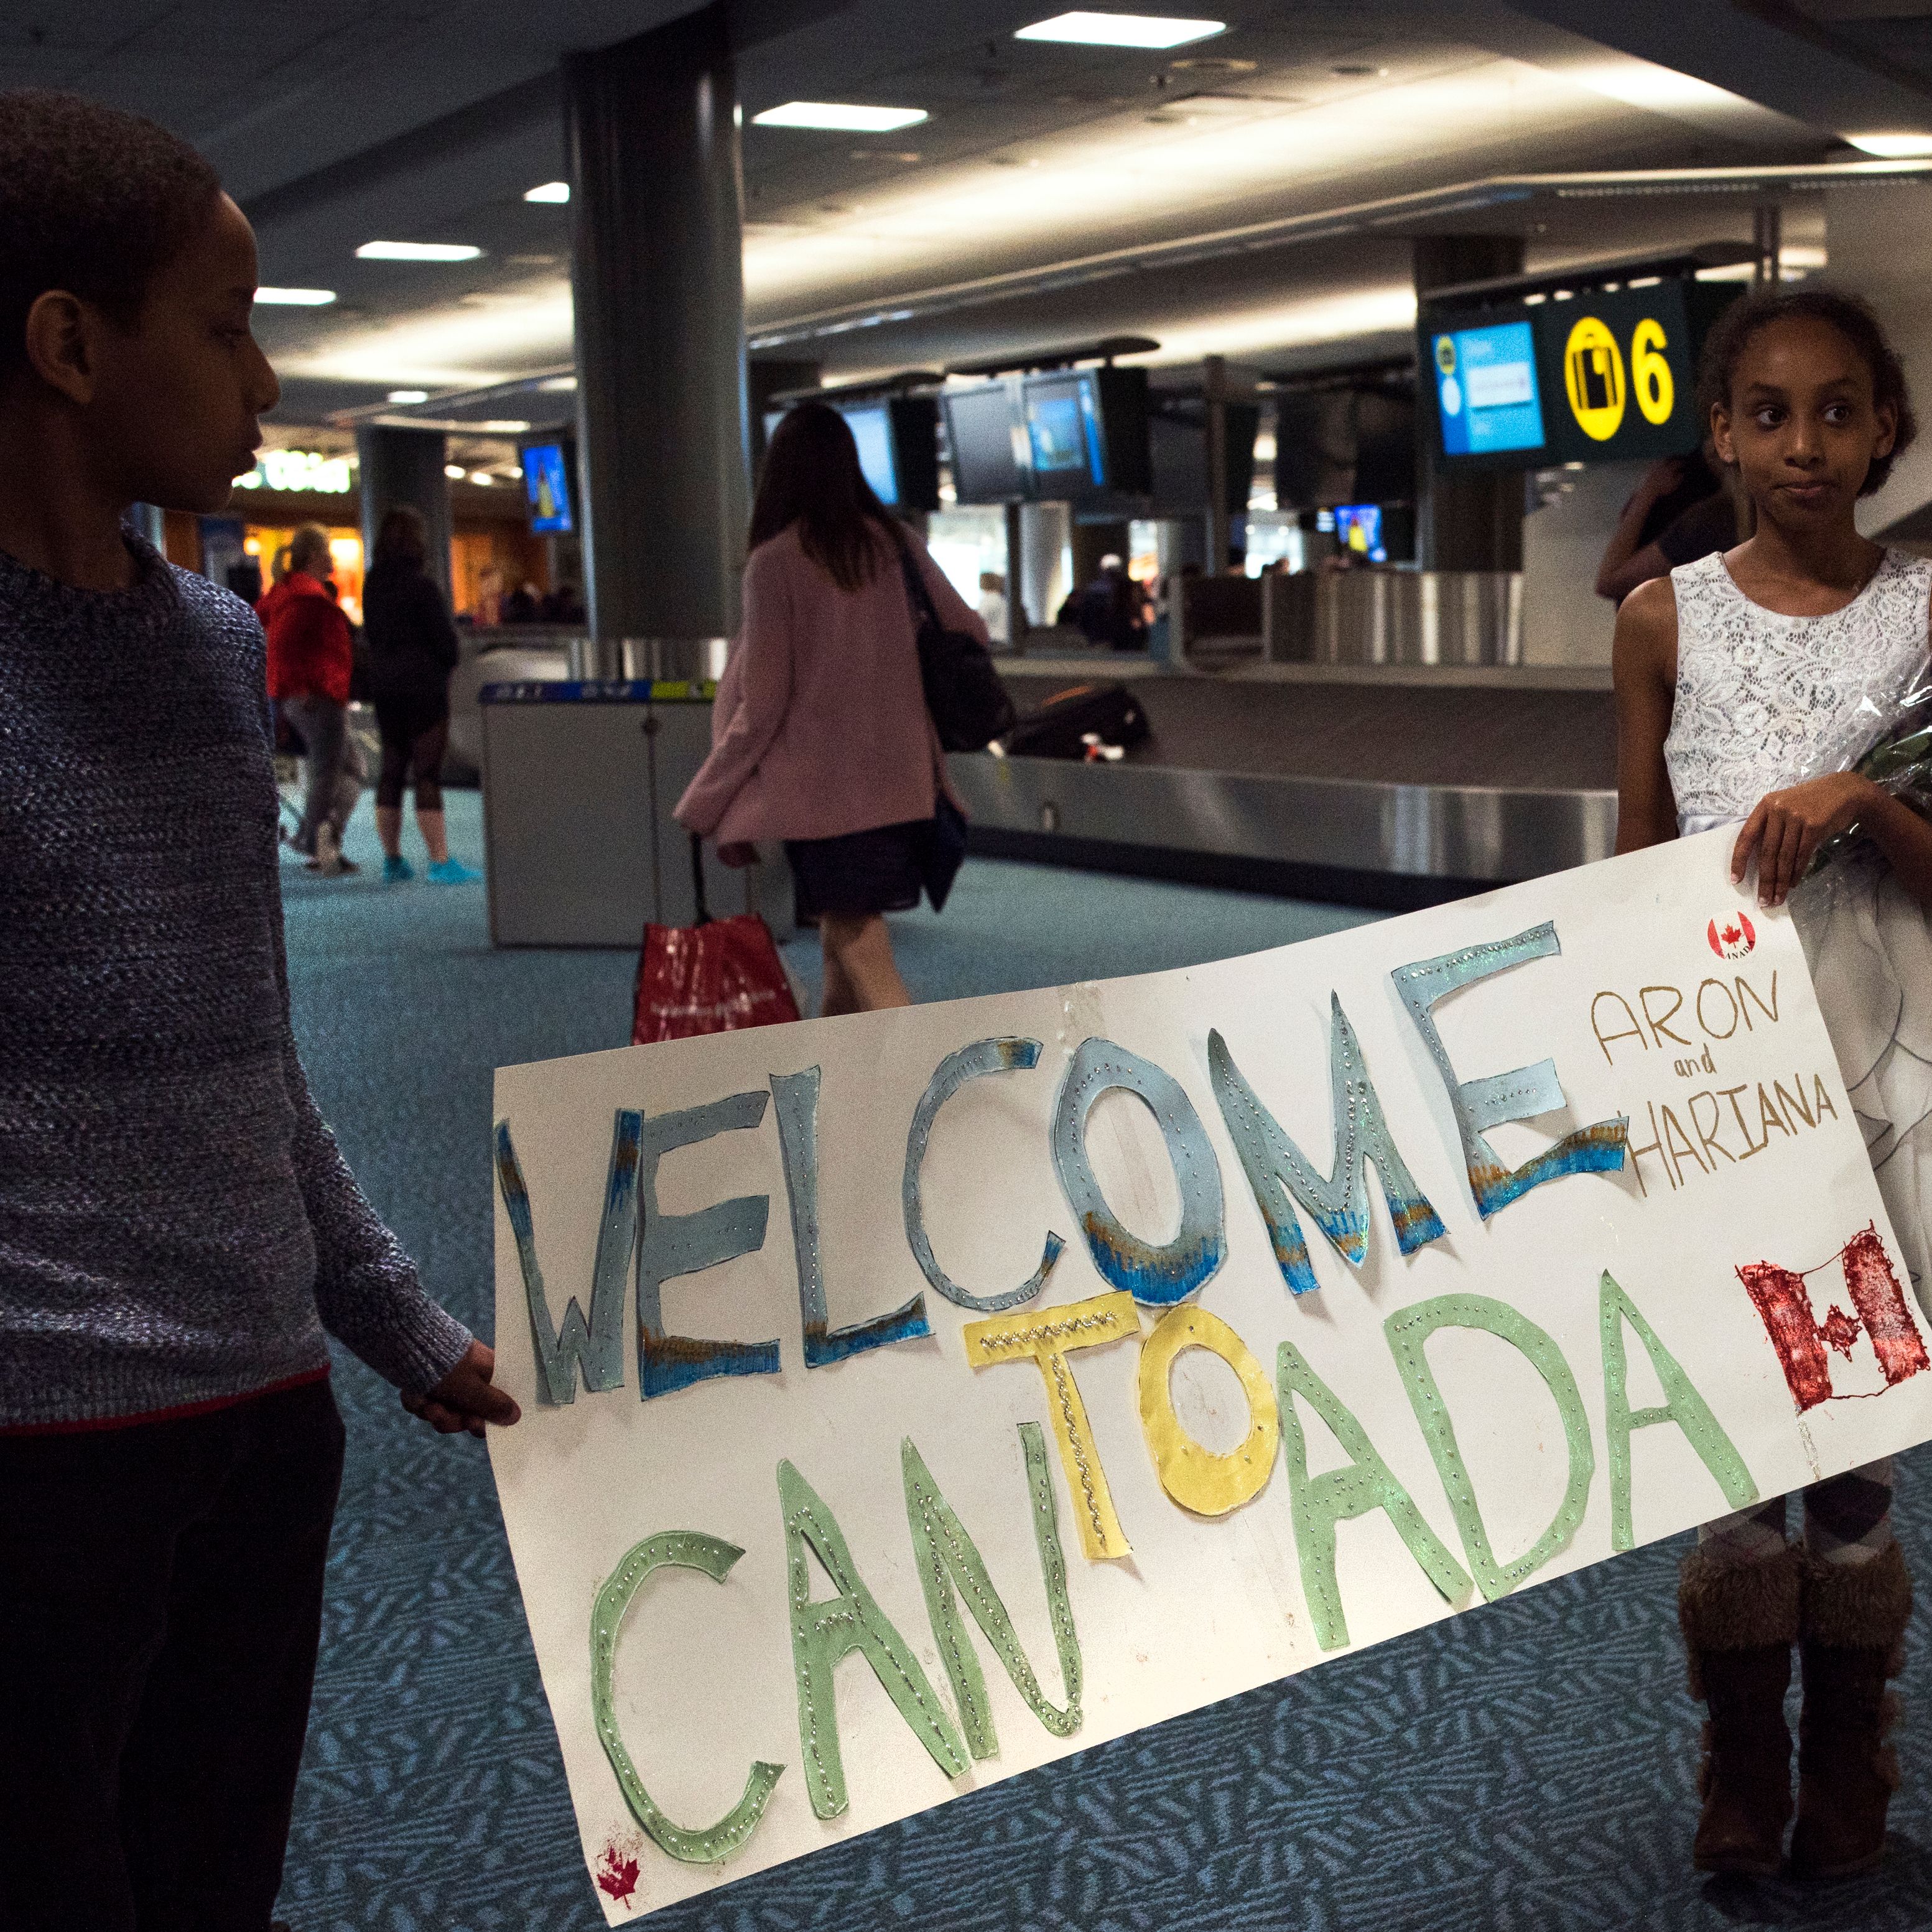 Welcoming refugees to Canada